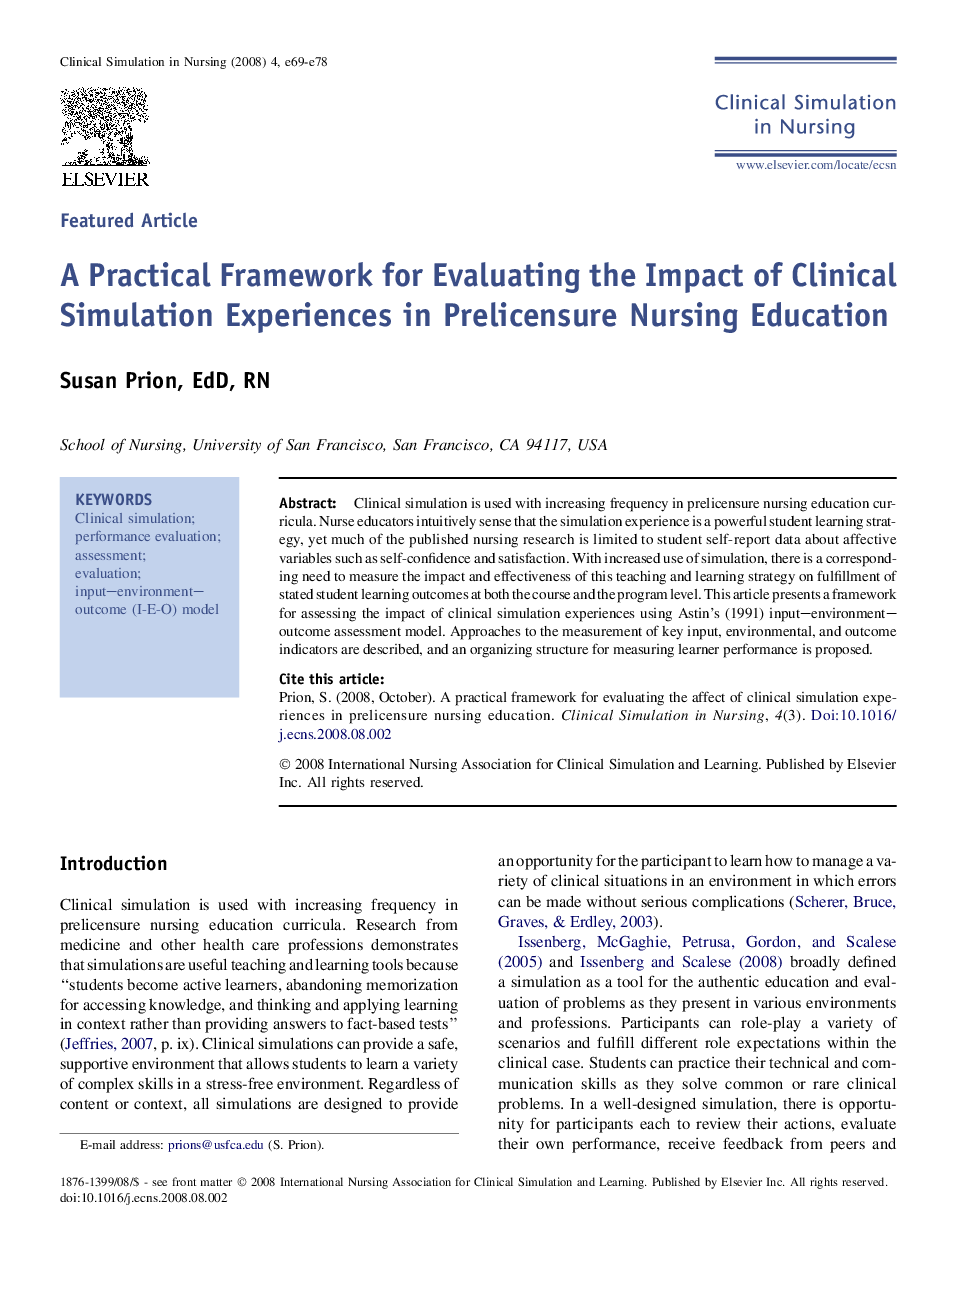 A Practical Framework for Evaluating the Impact of Clinical Simulation Experiences in Prelicensure Nursing Education 